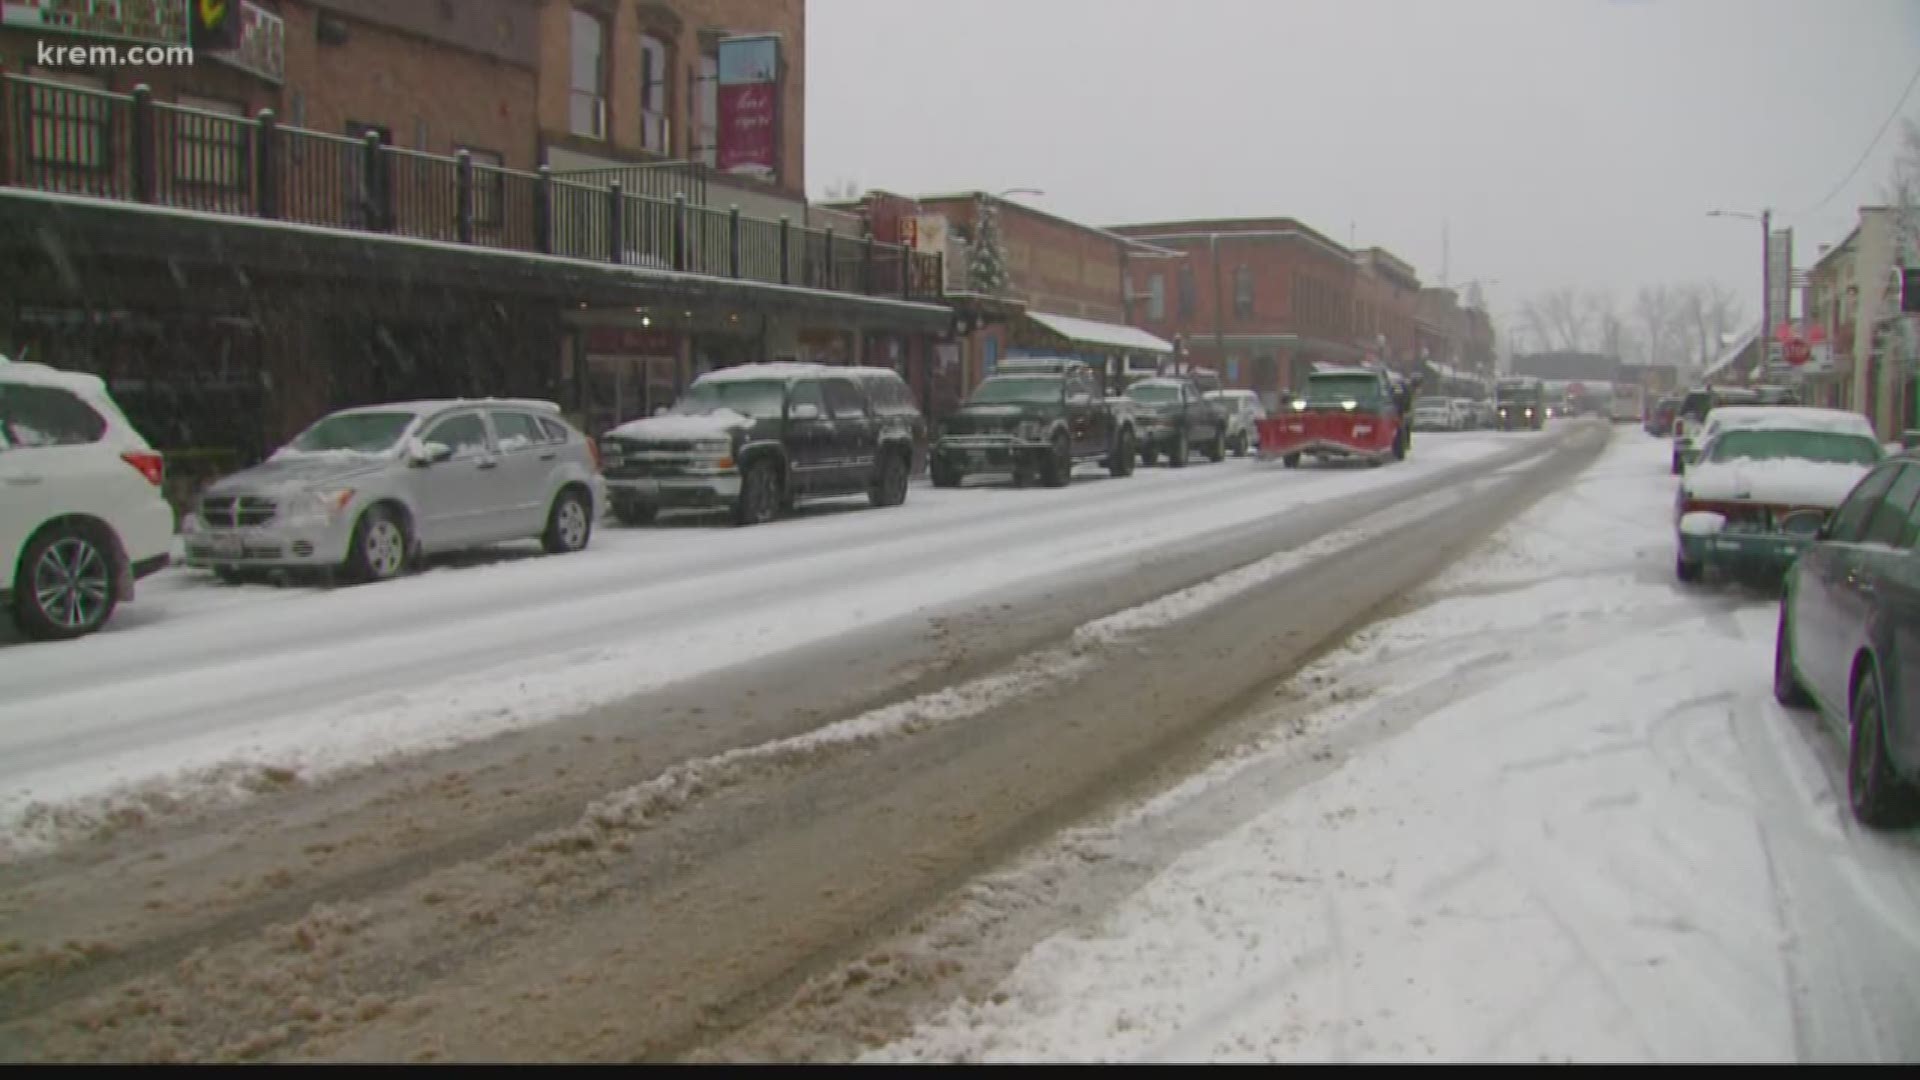 Forecasters were calling for up to seven inches of snow in Sandpoint and even higher amounts in mountain areas.